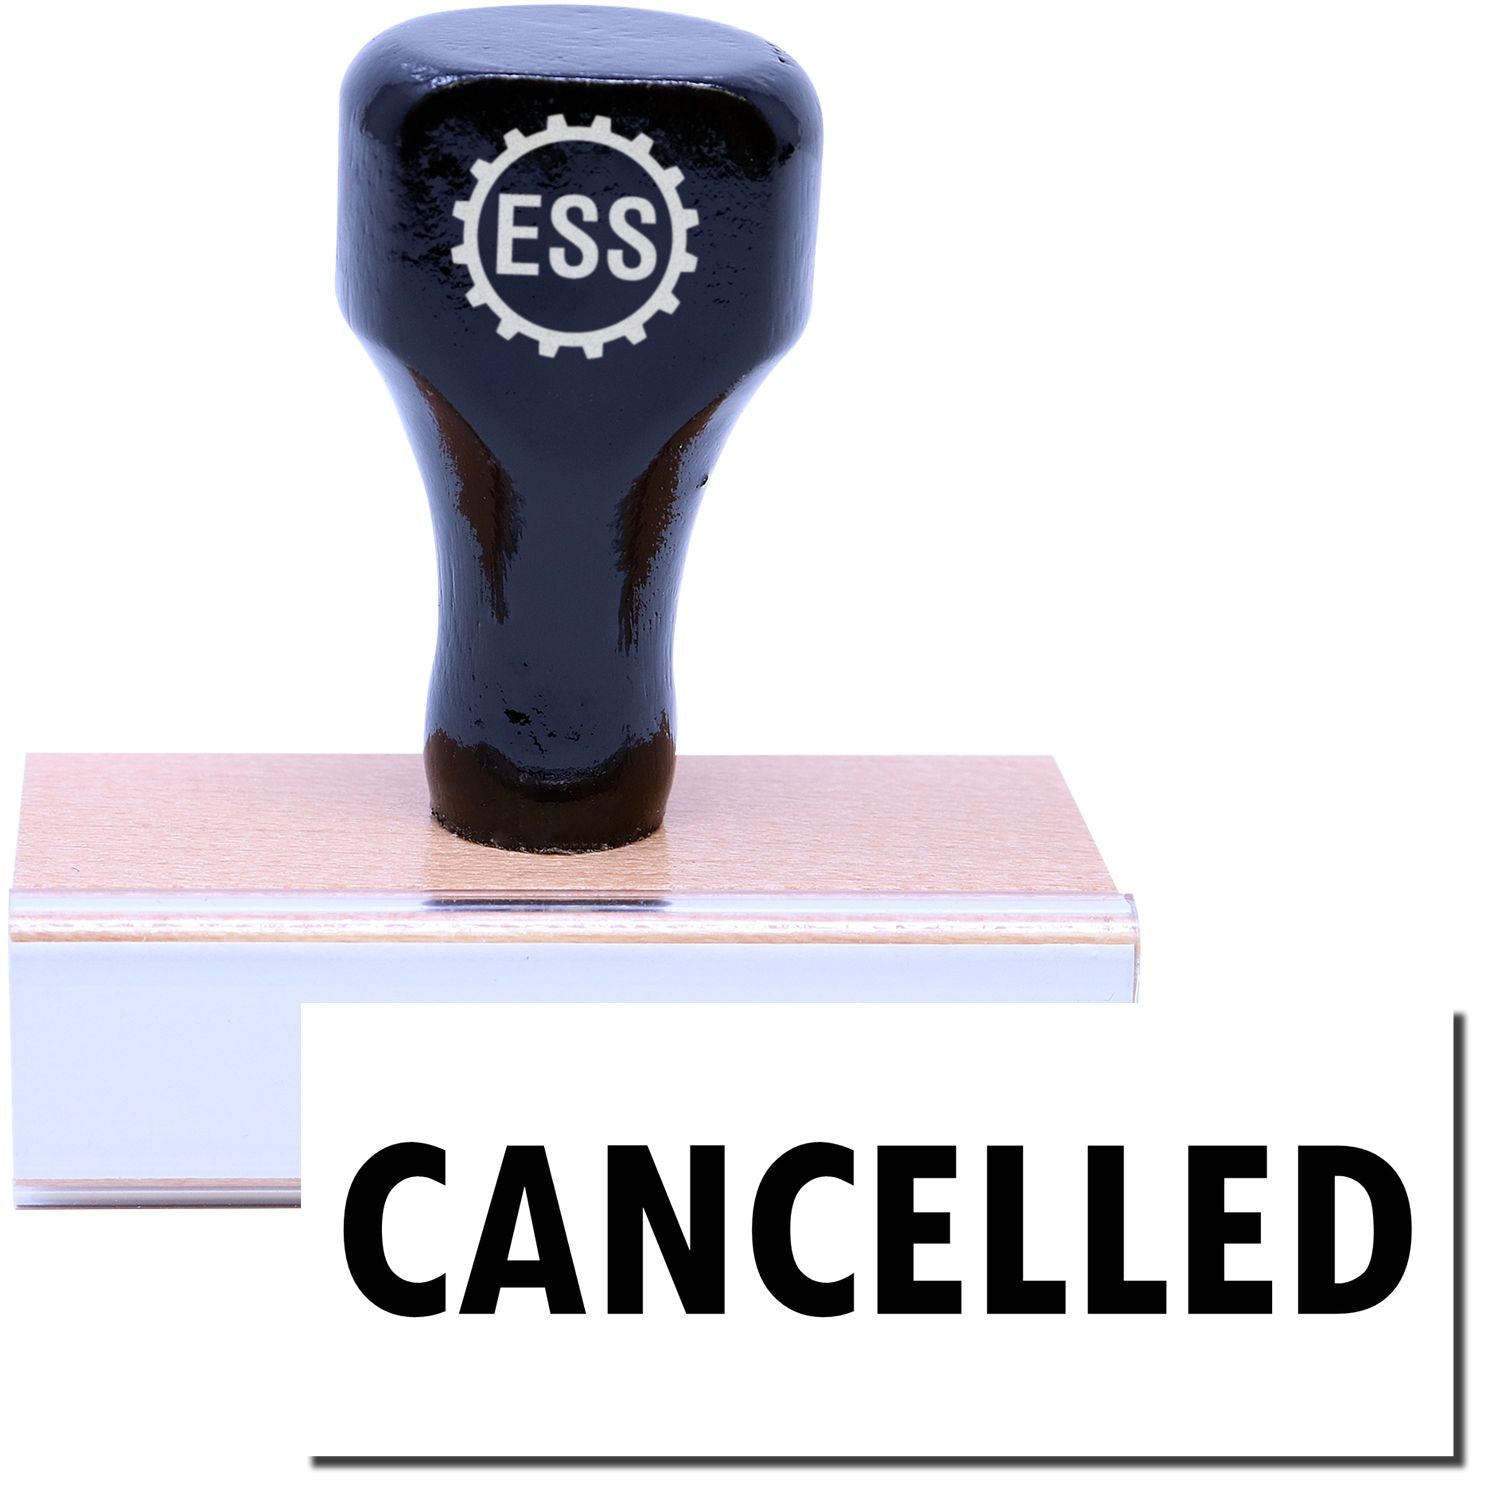 A stock office rubber stamp with a stamped image showing how the text "CANCELLED" is displayed after stamping.